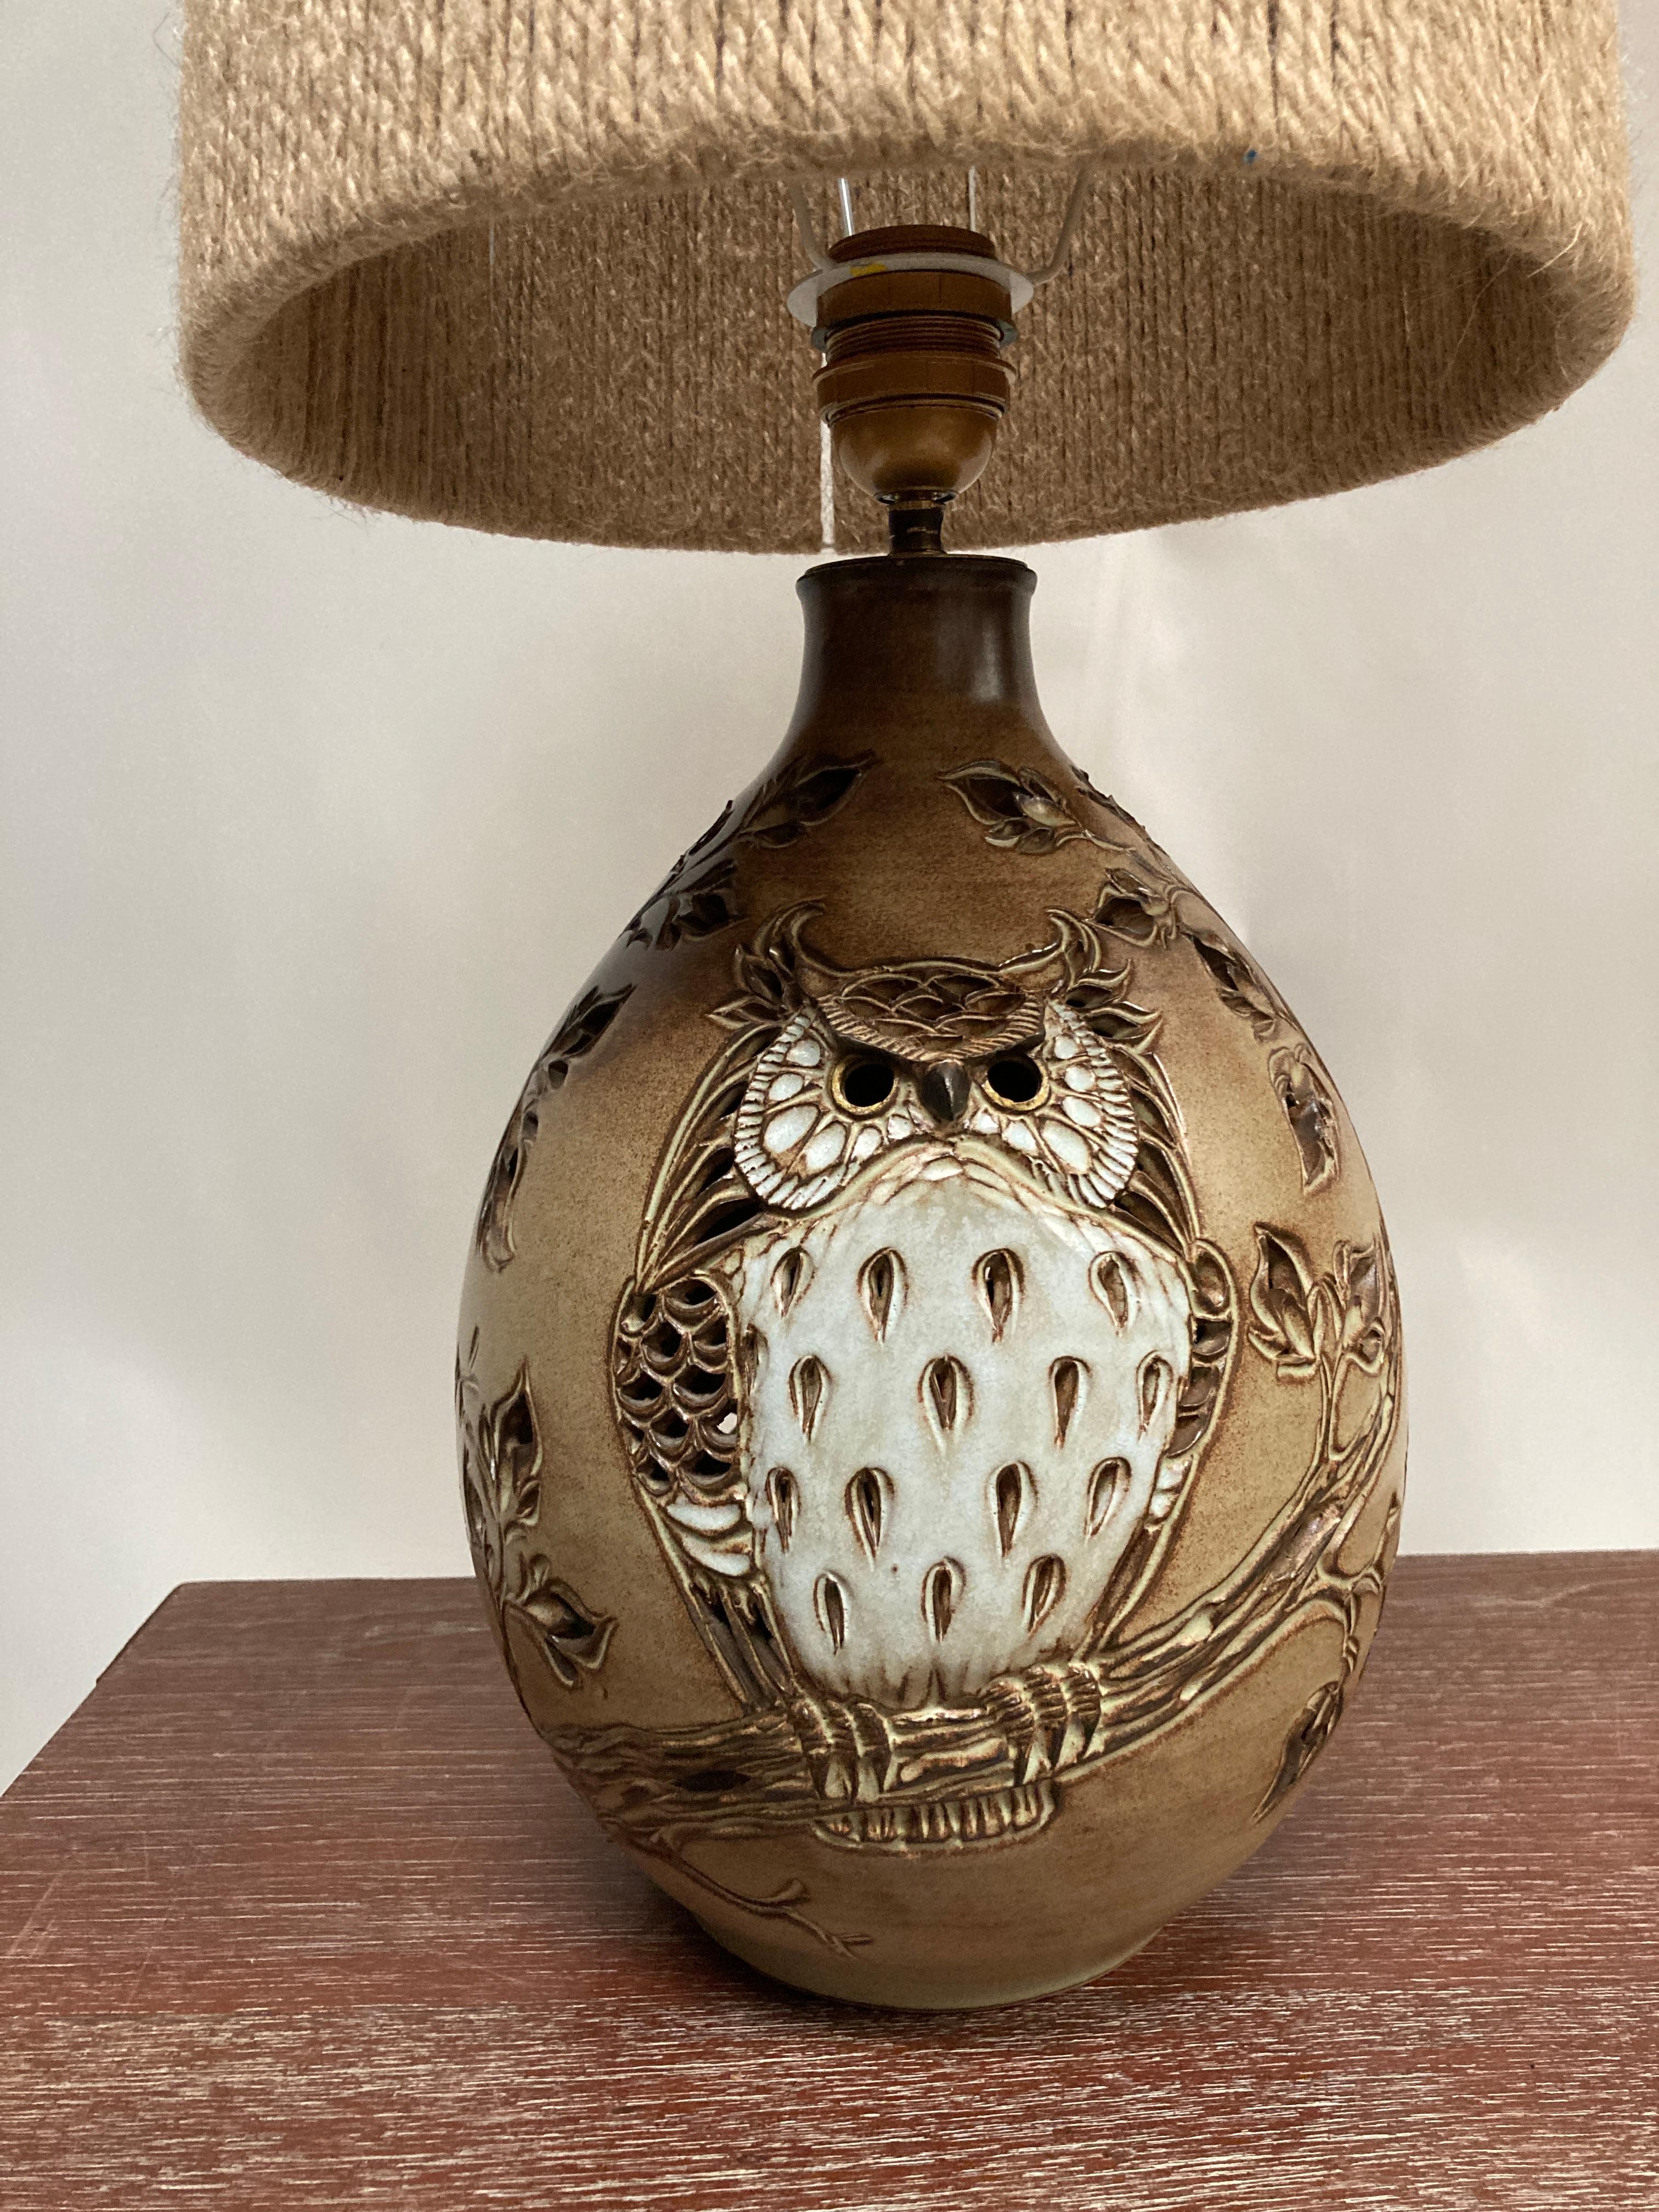 One of a kind hand made Studio pottery ceramic lamp
Showing a carved owl 
Two lights, one inside one outside
Dimensions given without shade
no shade included